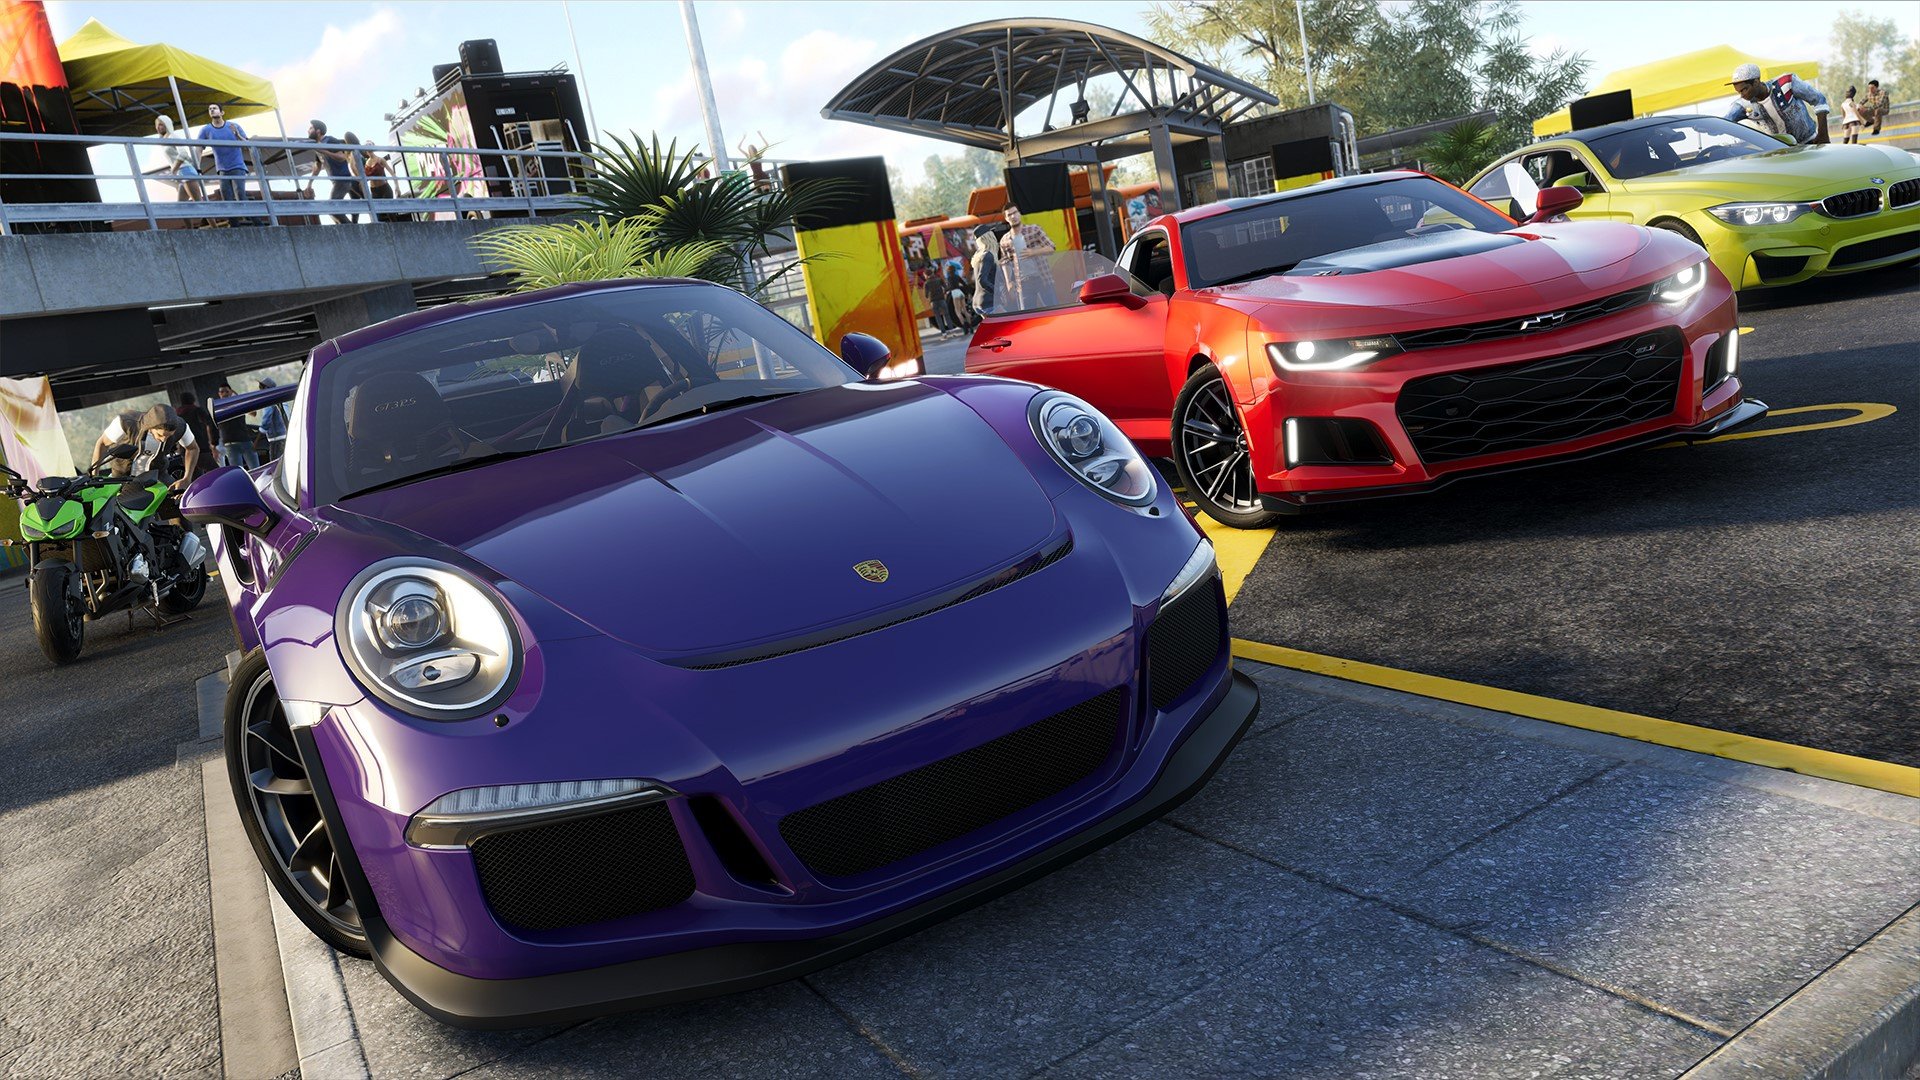 The Crew 2 (PS4 / PlayStation 4) Game Profile News, Reviews, Videos